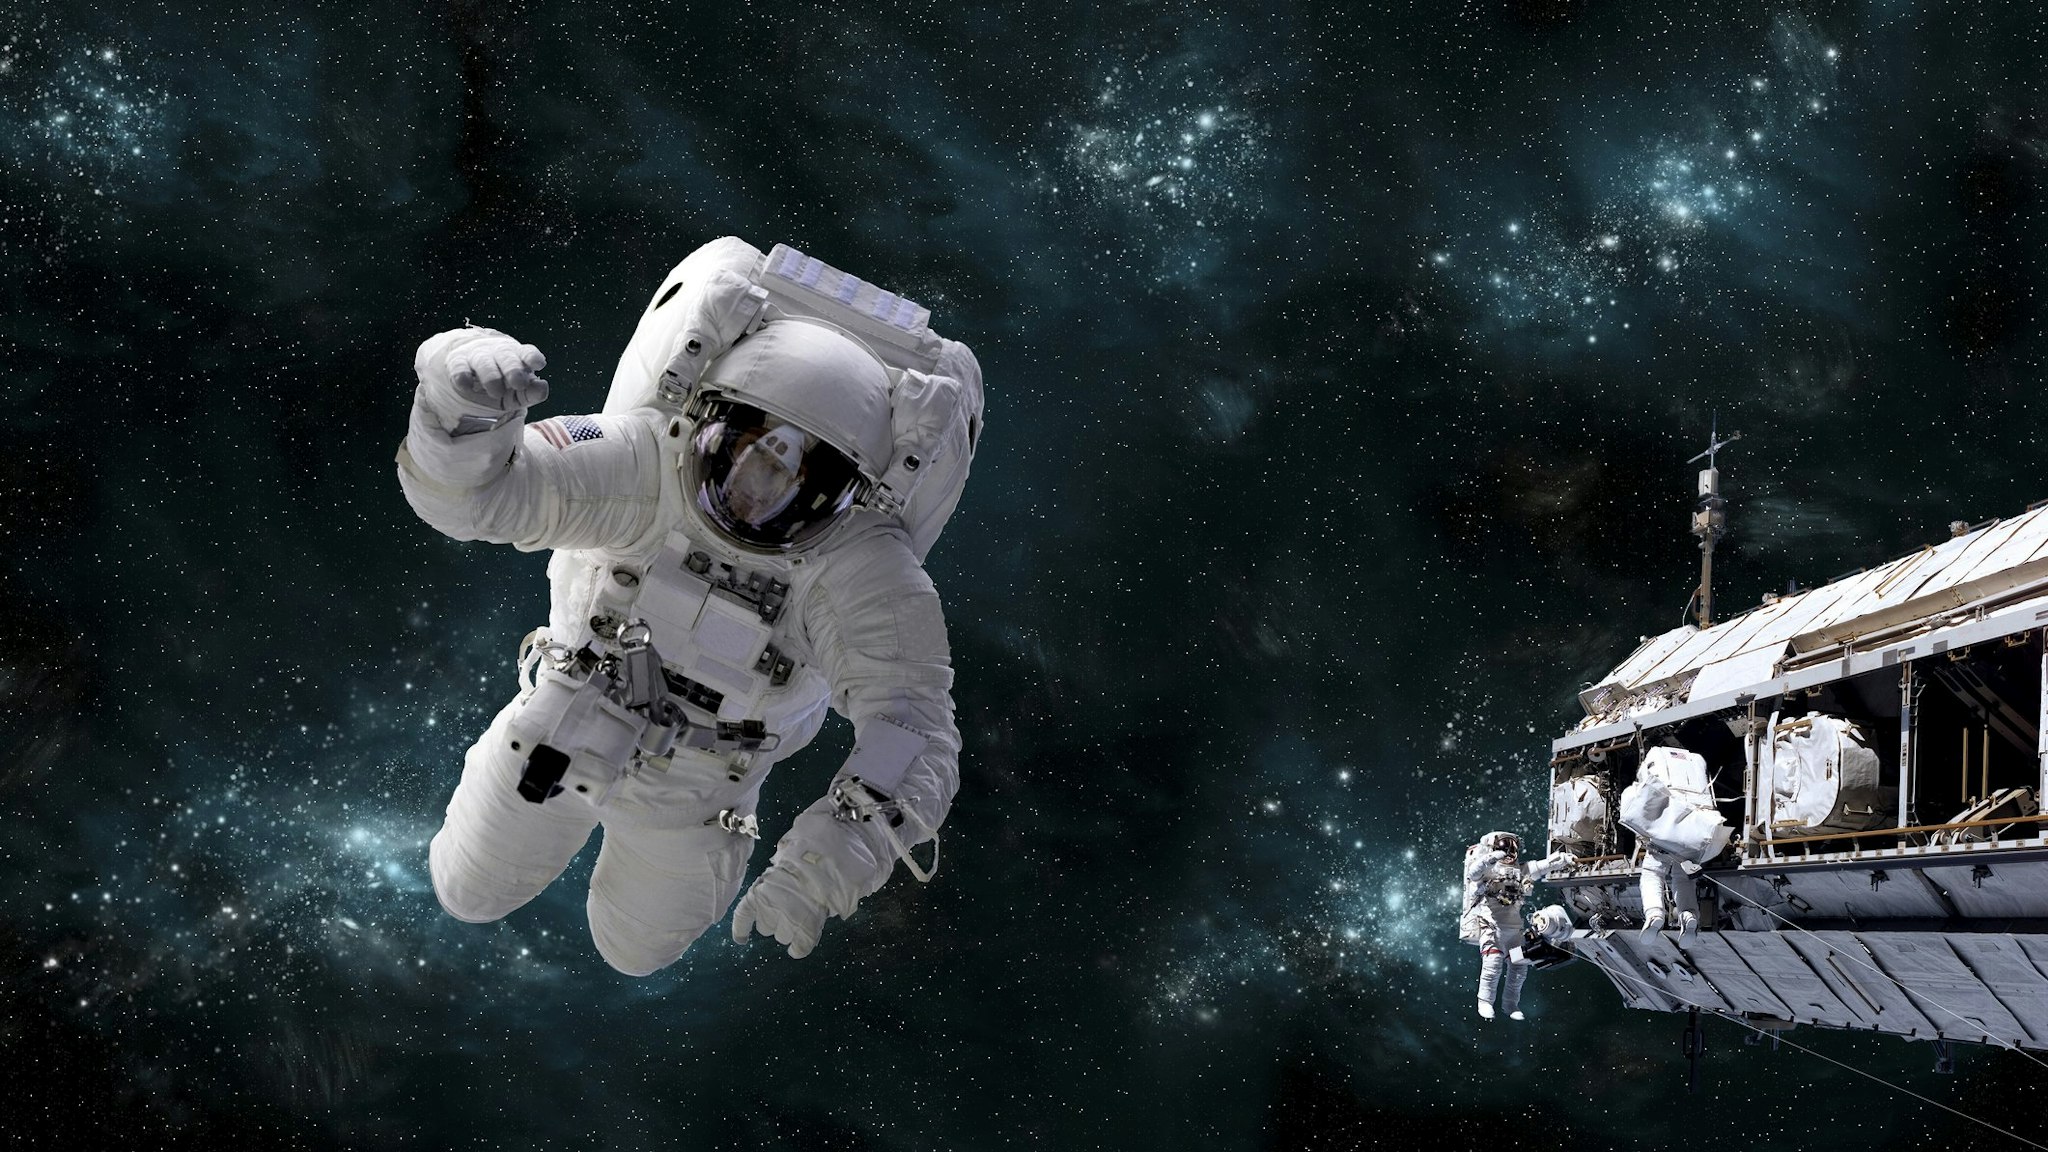 Artists concept of astronaut floating in outer space while his fellow astronauts work on the space station. A galactic scene serves as background.